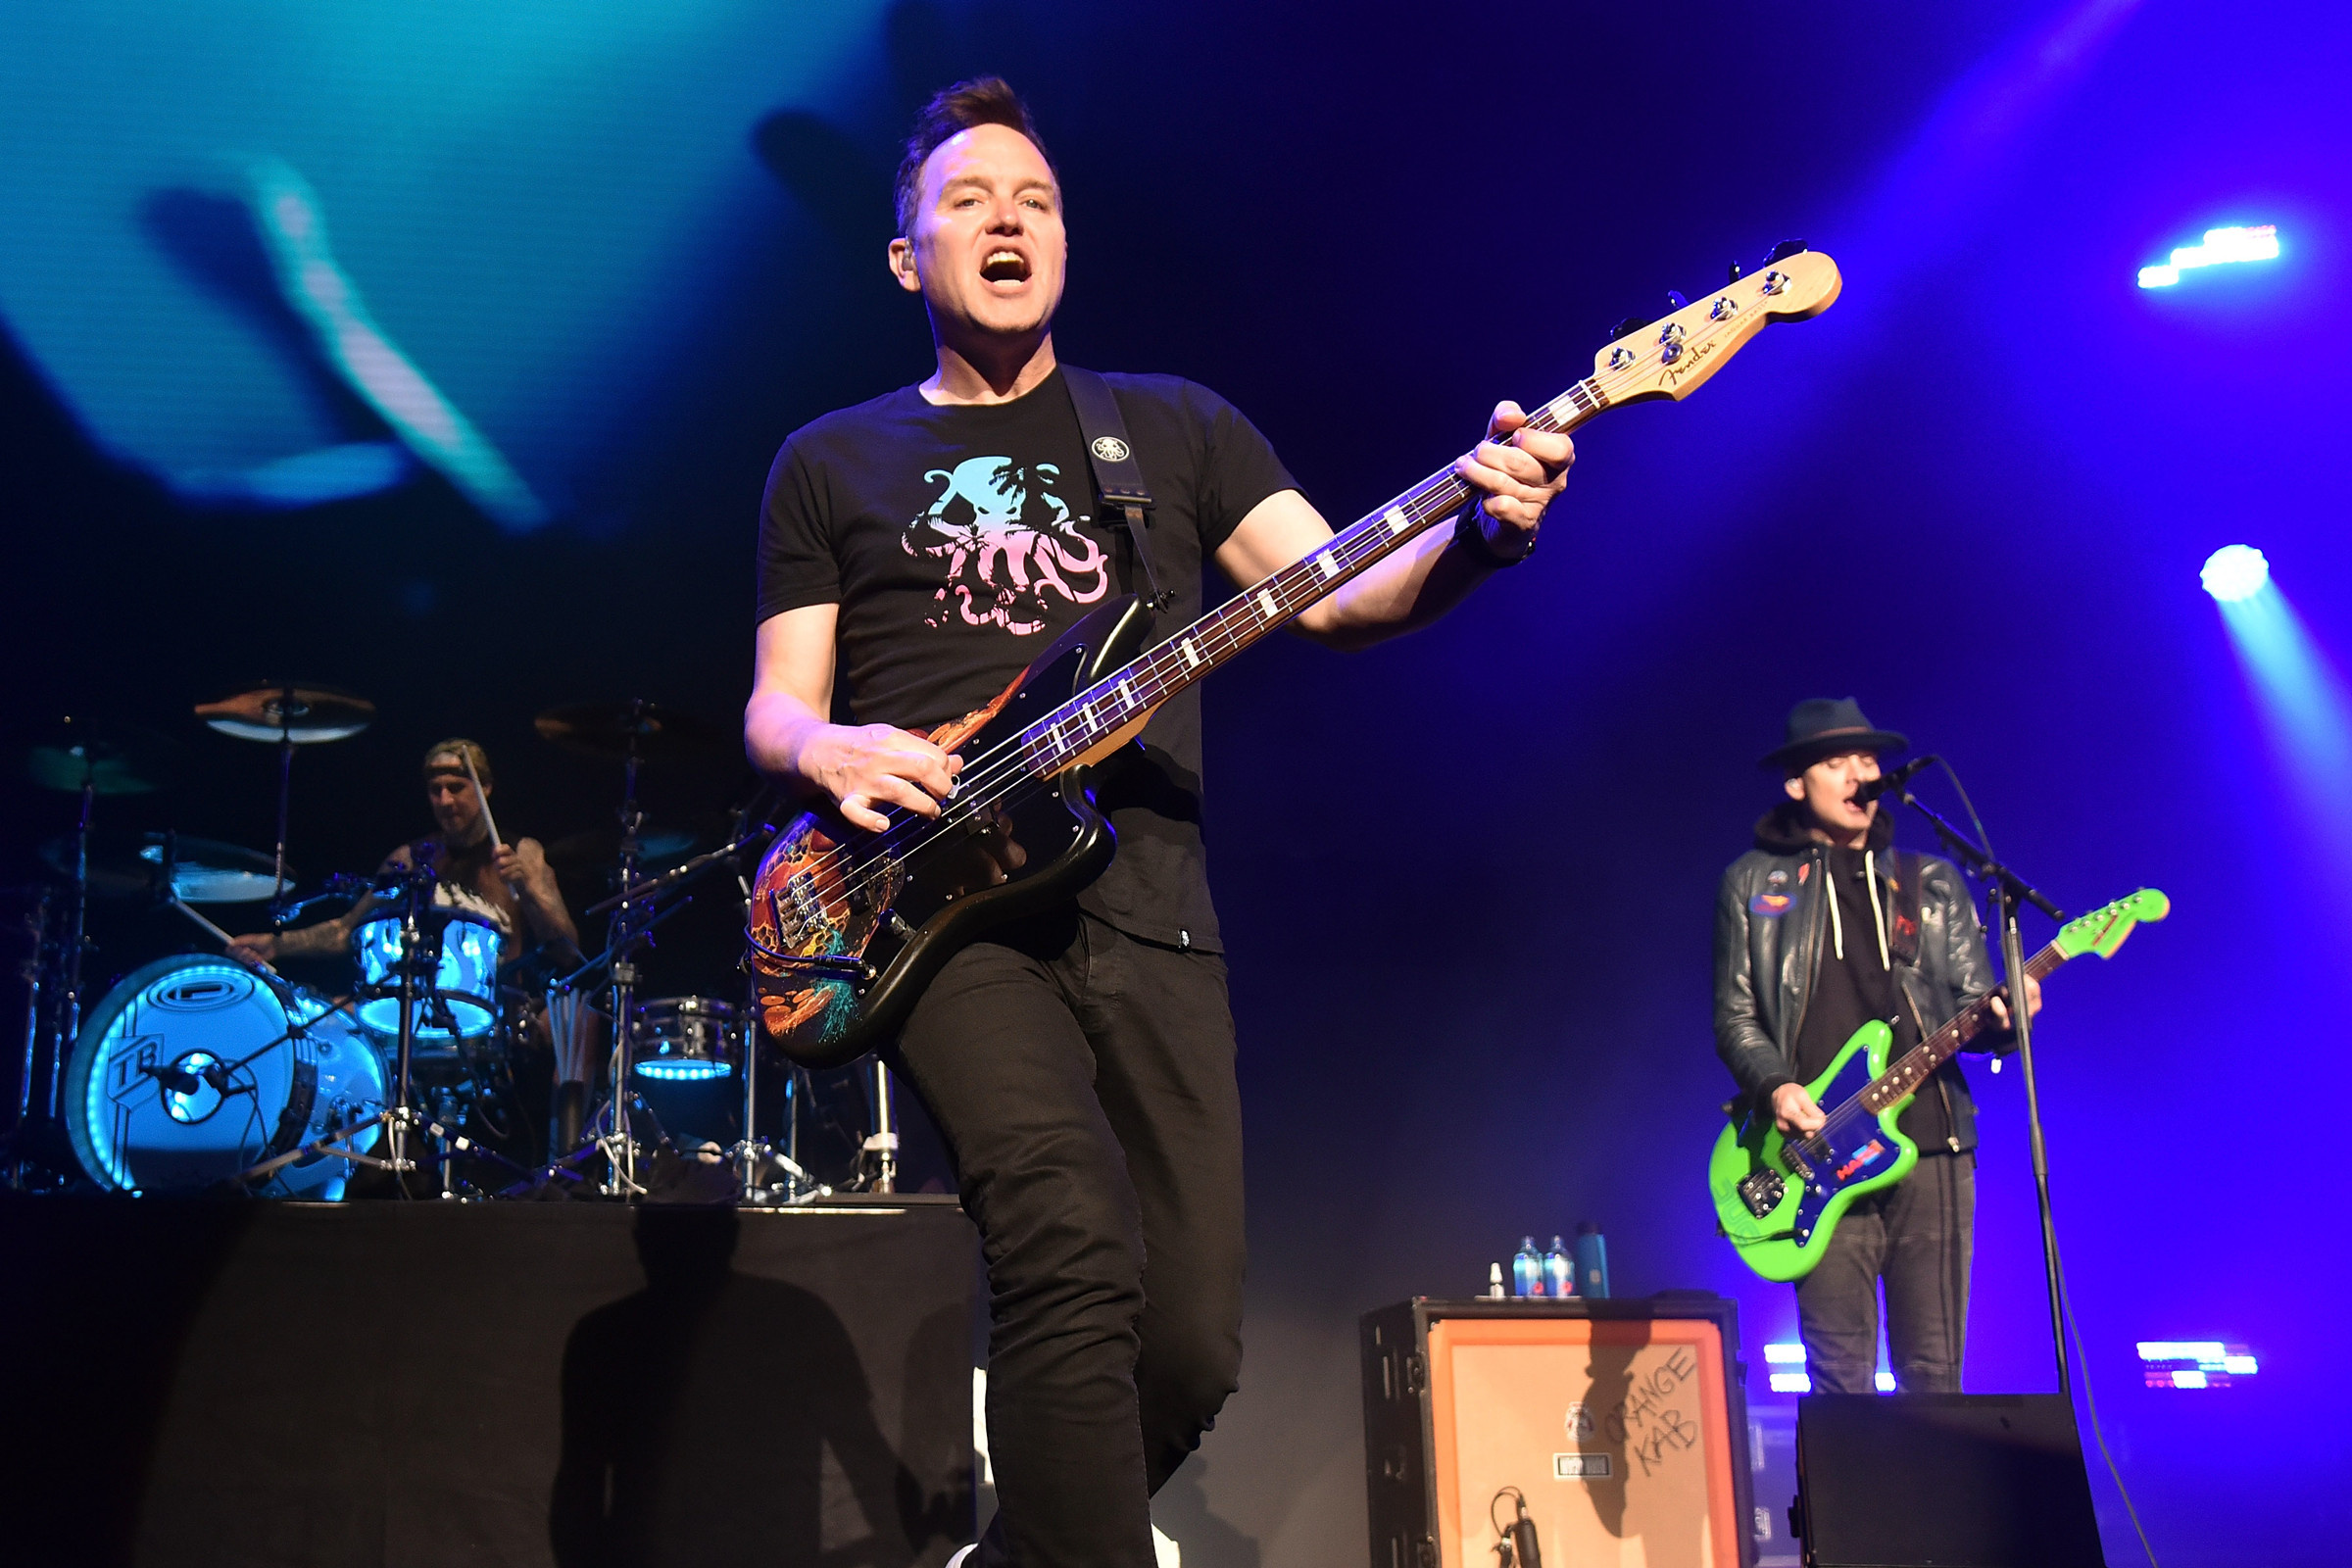 Blink-182 performing Enema of the State, Special tour announcement, Full album experience, Nostalgic fan favorite, 2400x1600 HD Desktop